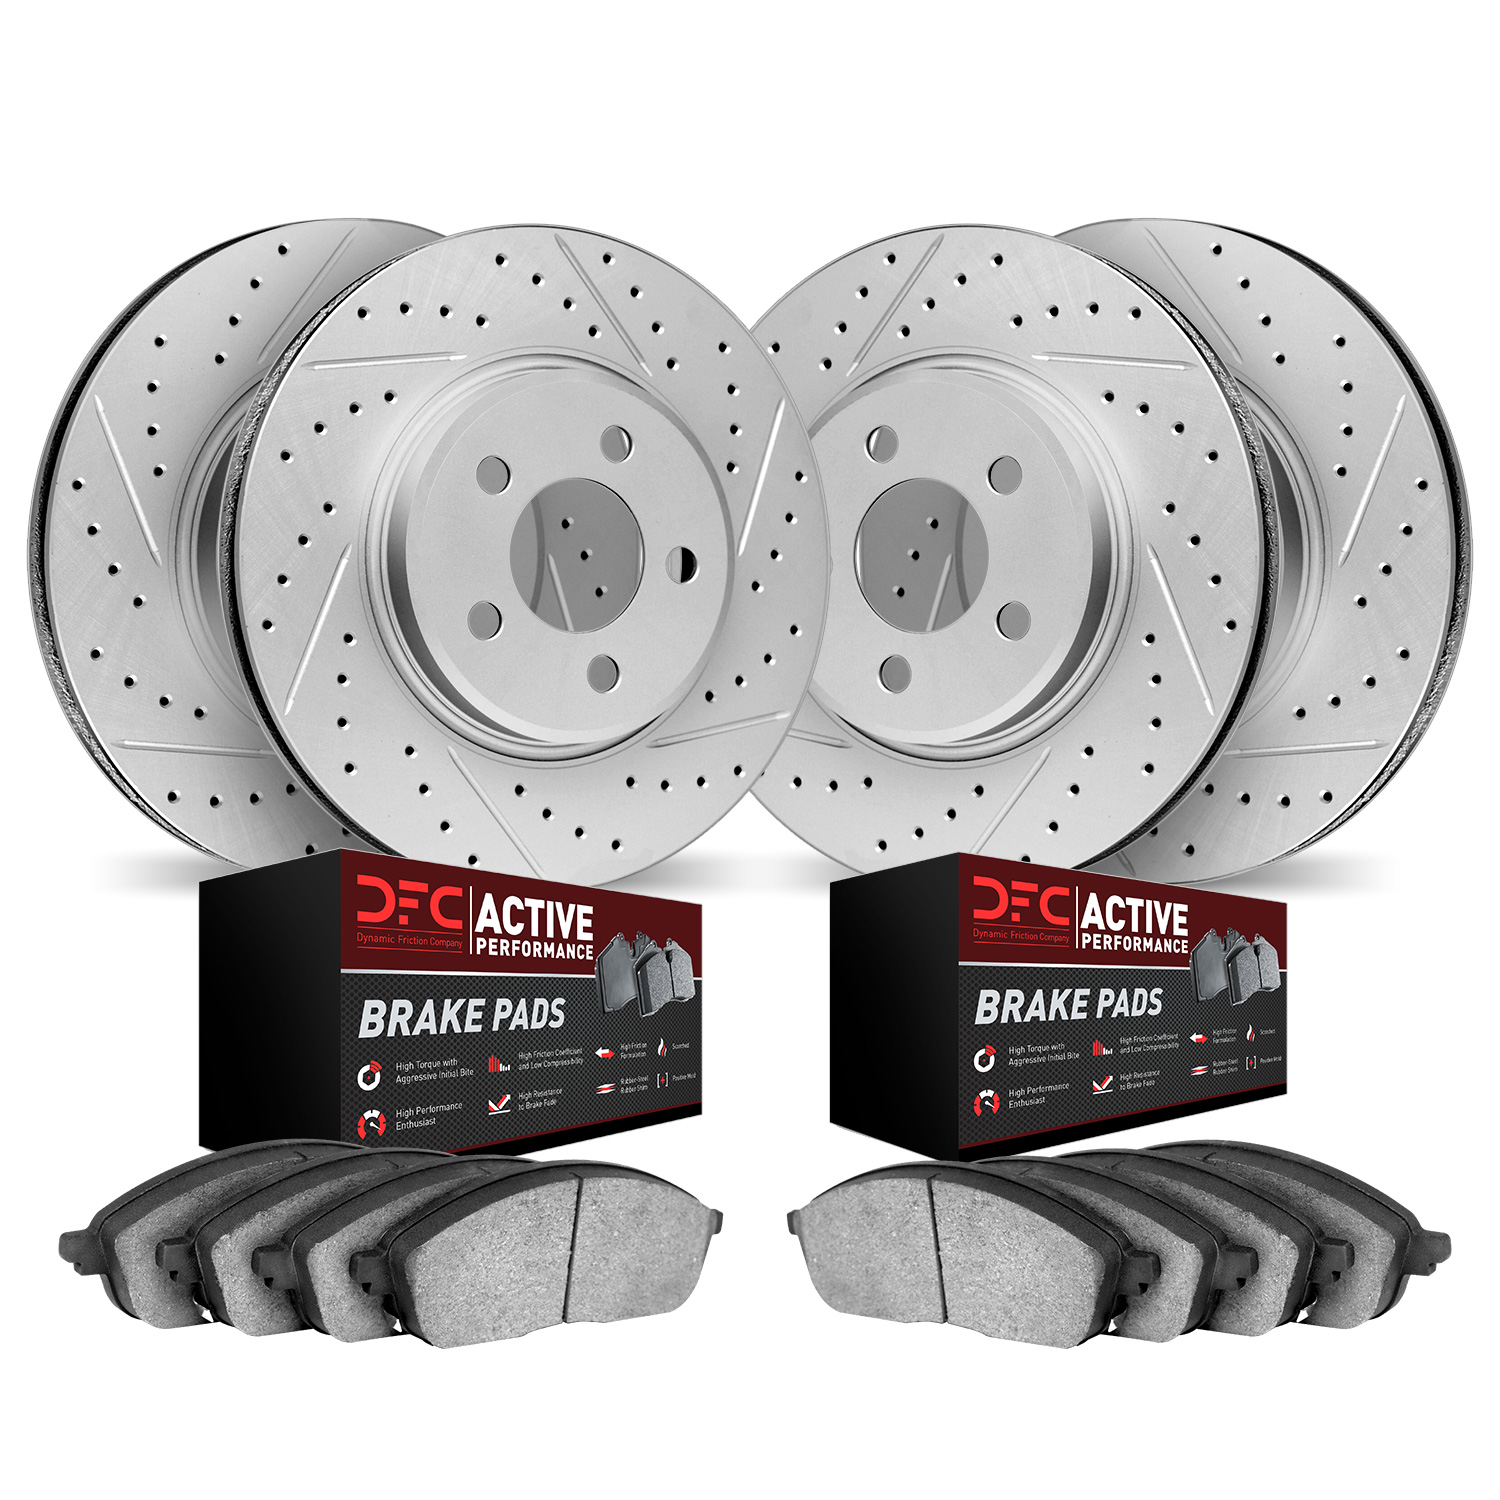 2704-31007 Geoperformance Drilled/Slotted Brake Rotors with Active Performance Pads Kit, 1996-2005 BMW, Position: Front and Rear